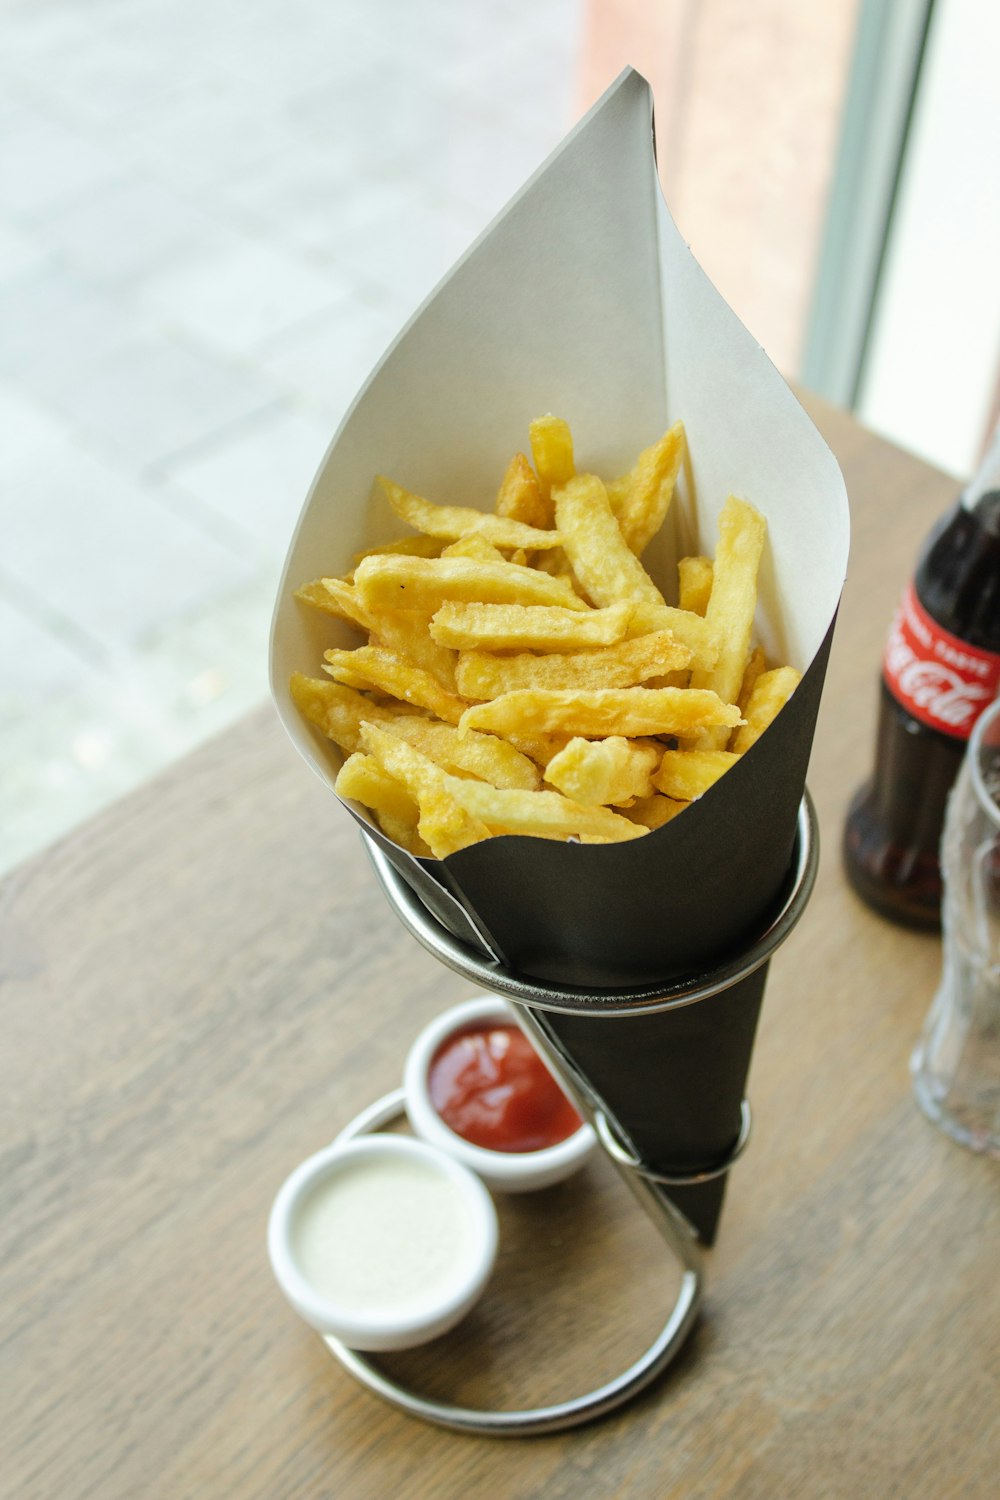 fries on black paper cone